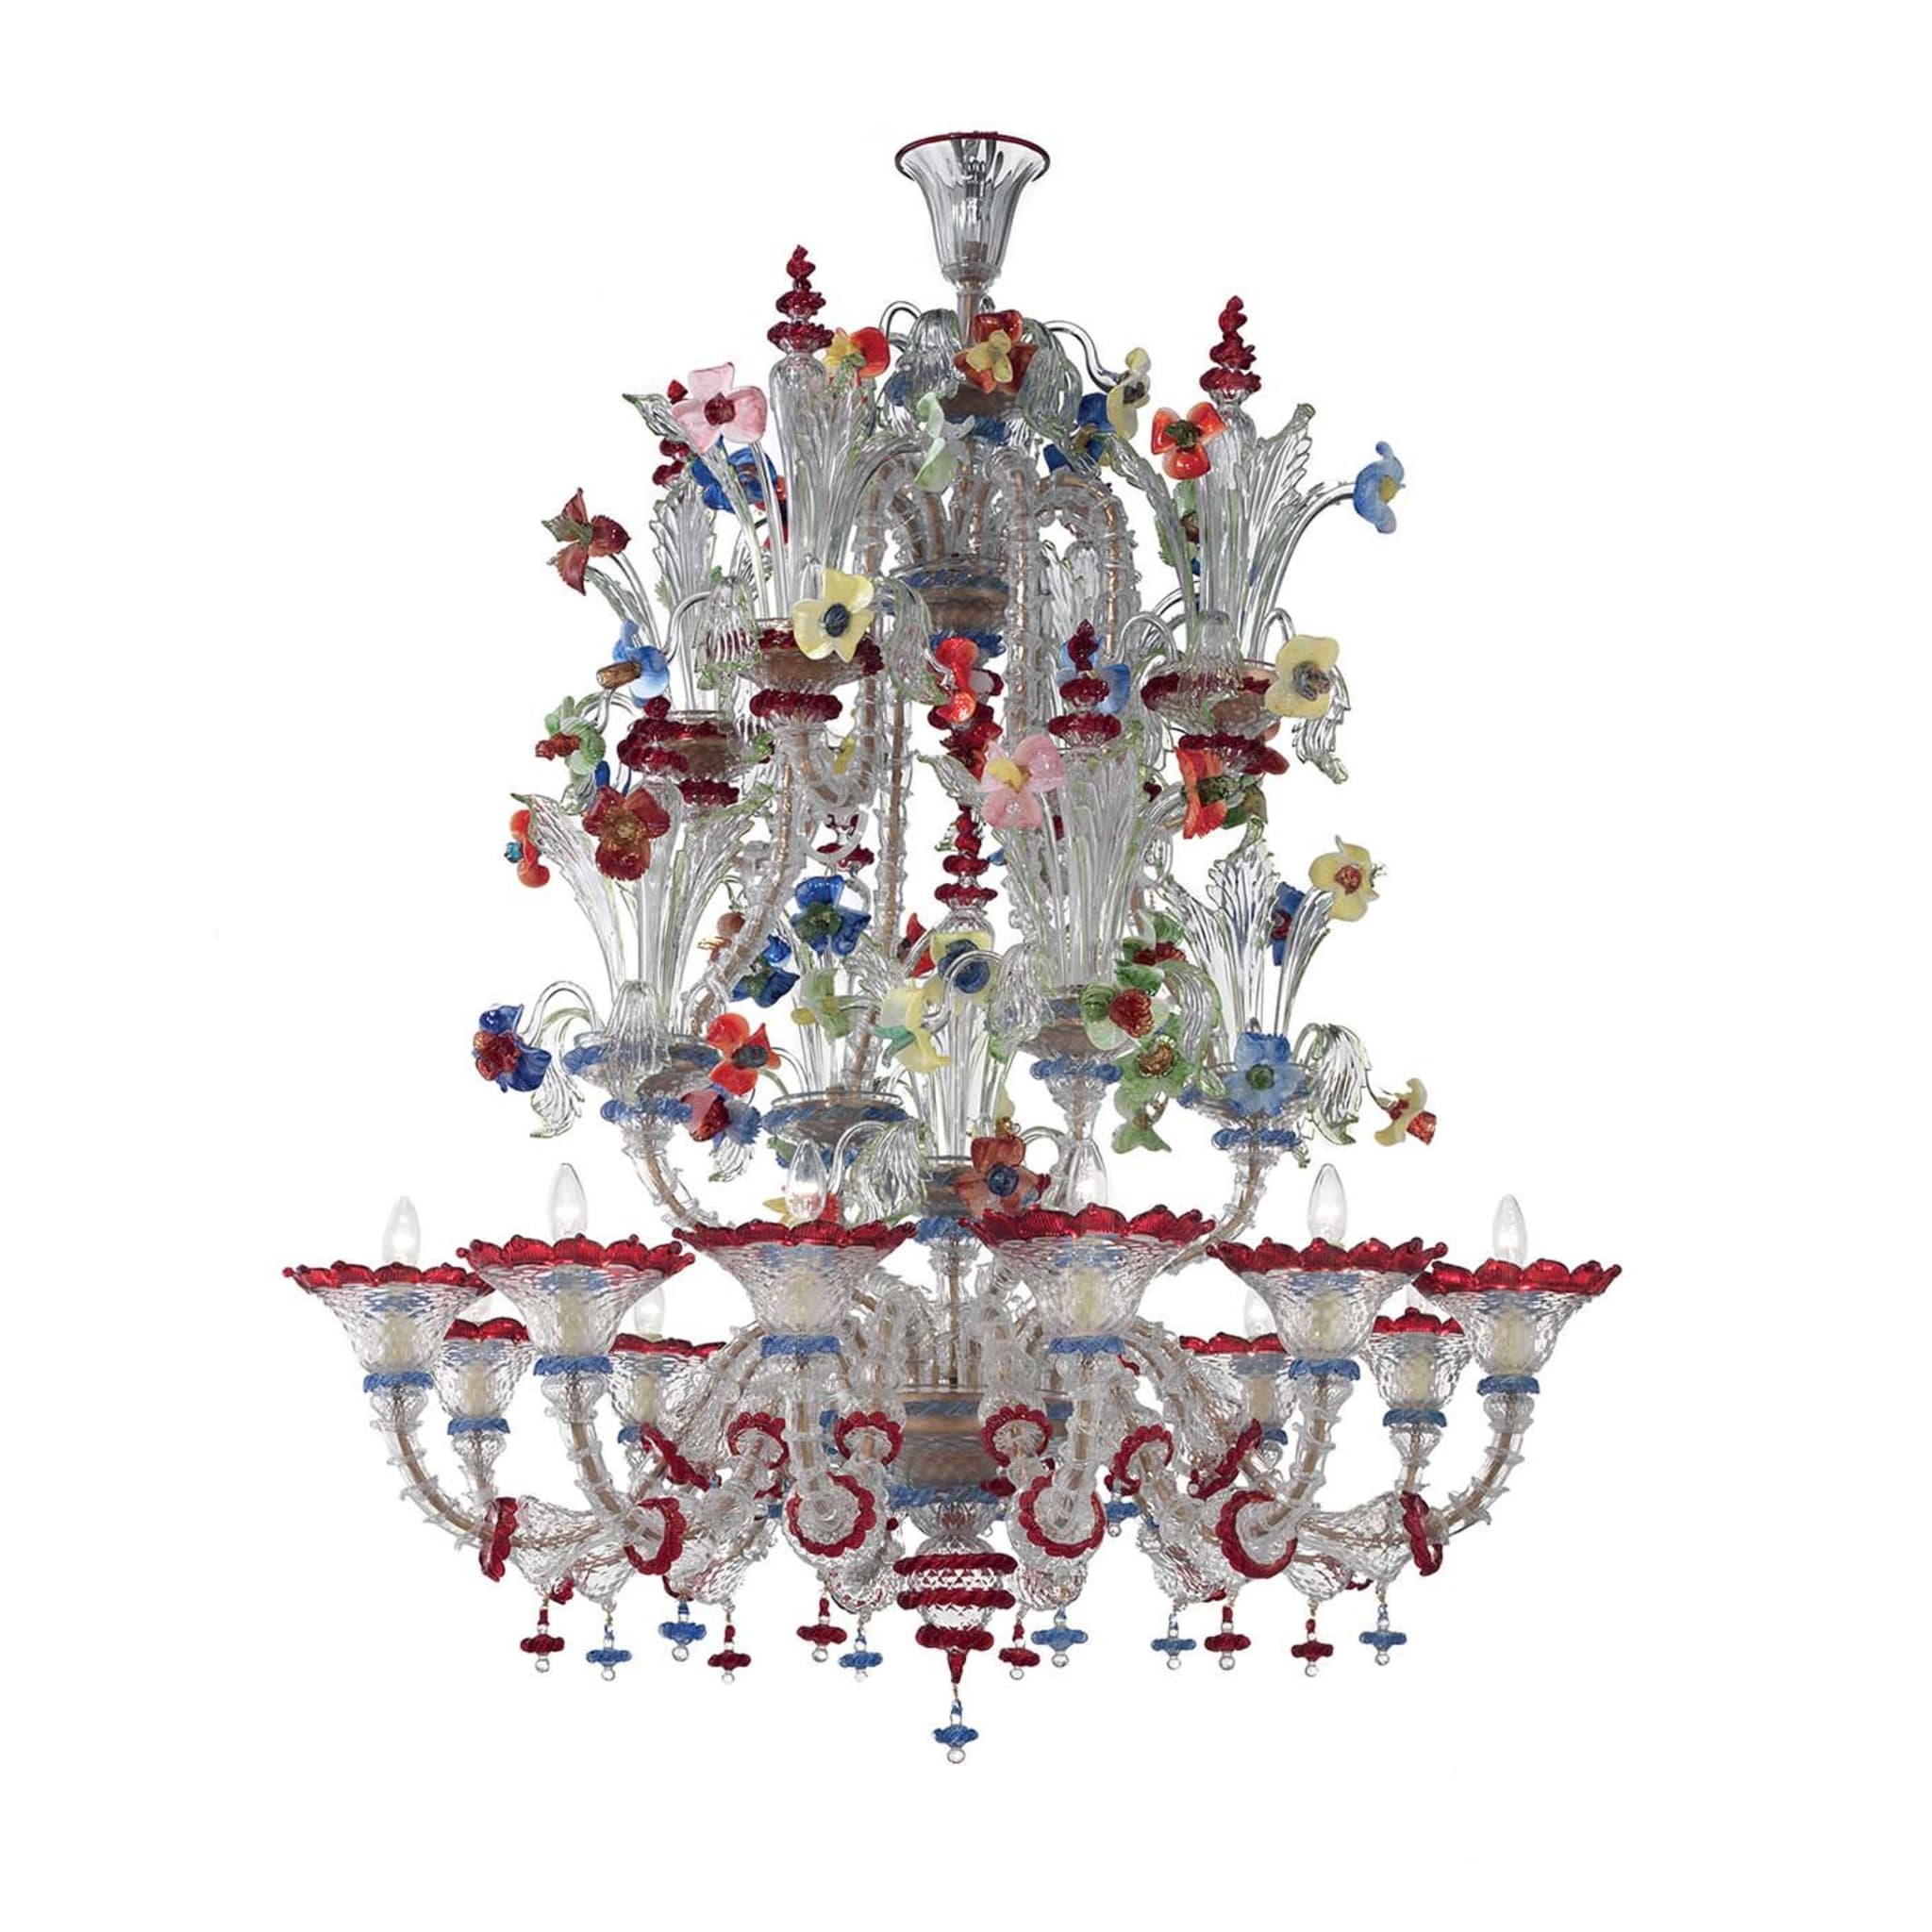 Calle Canaletto Chandelier - Main view